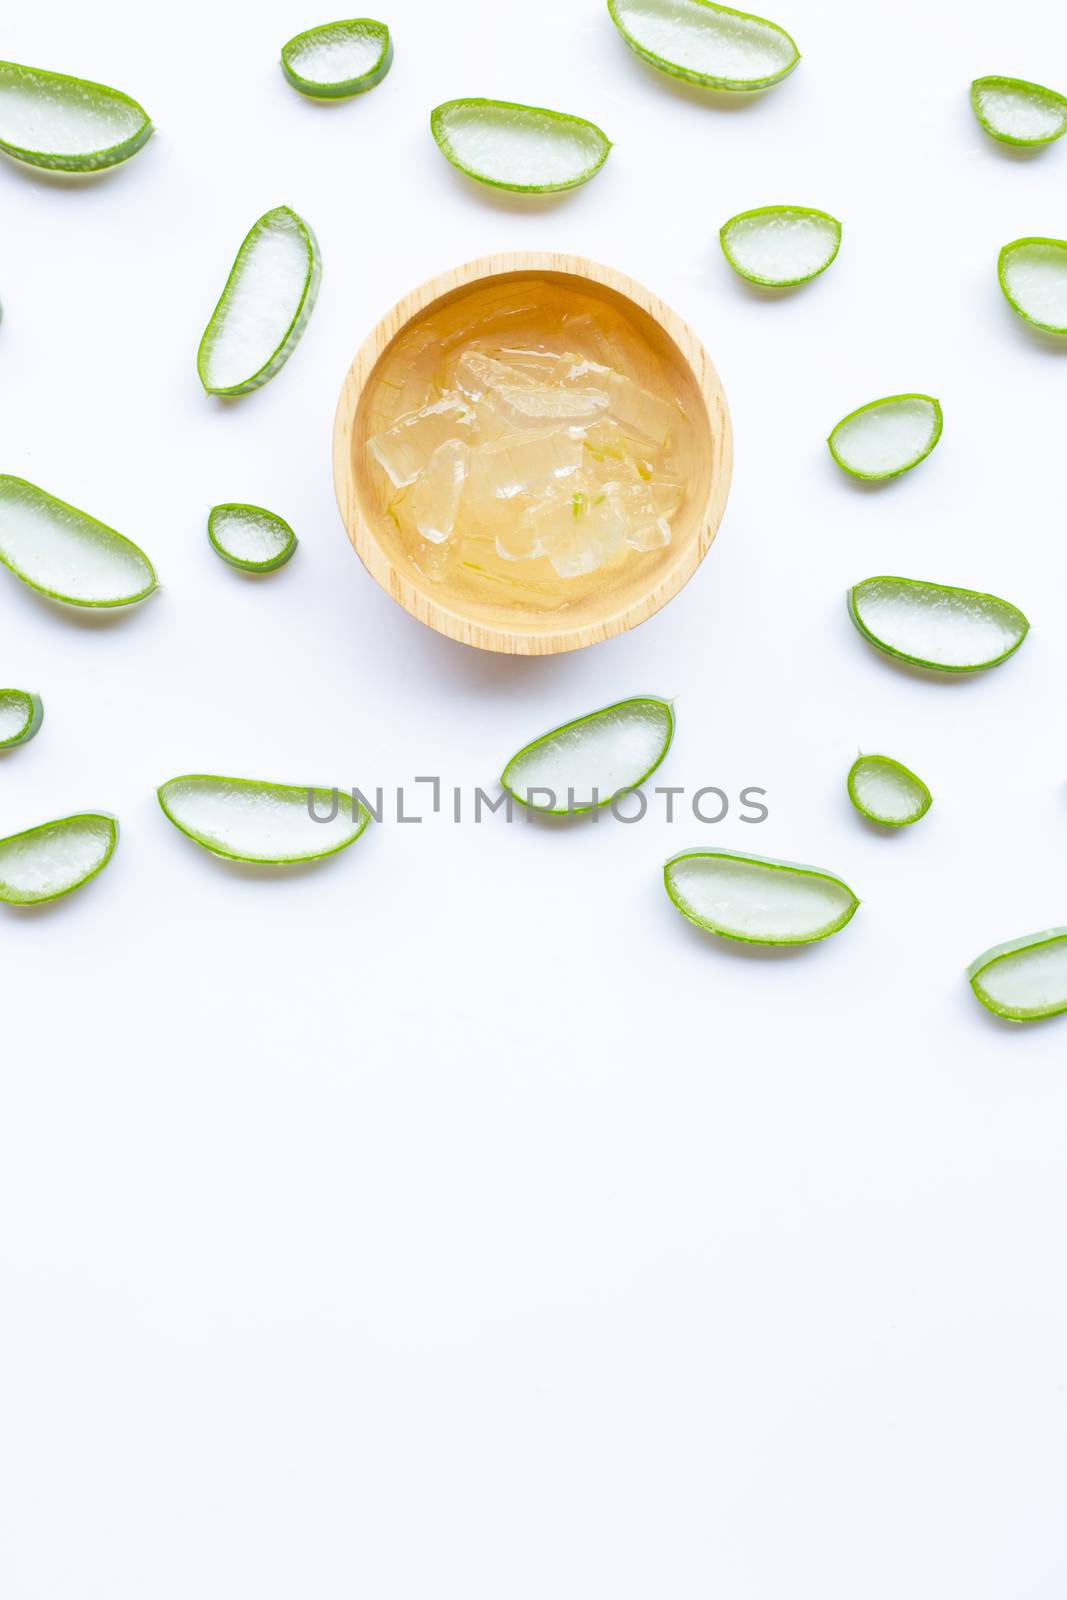 Aloe vera slices with aloe vera gel in wooden bowl on white background. Copy space